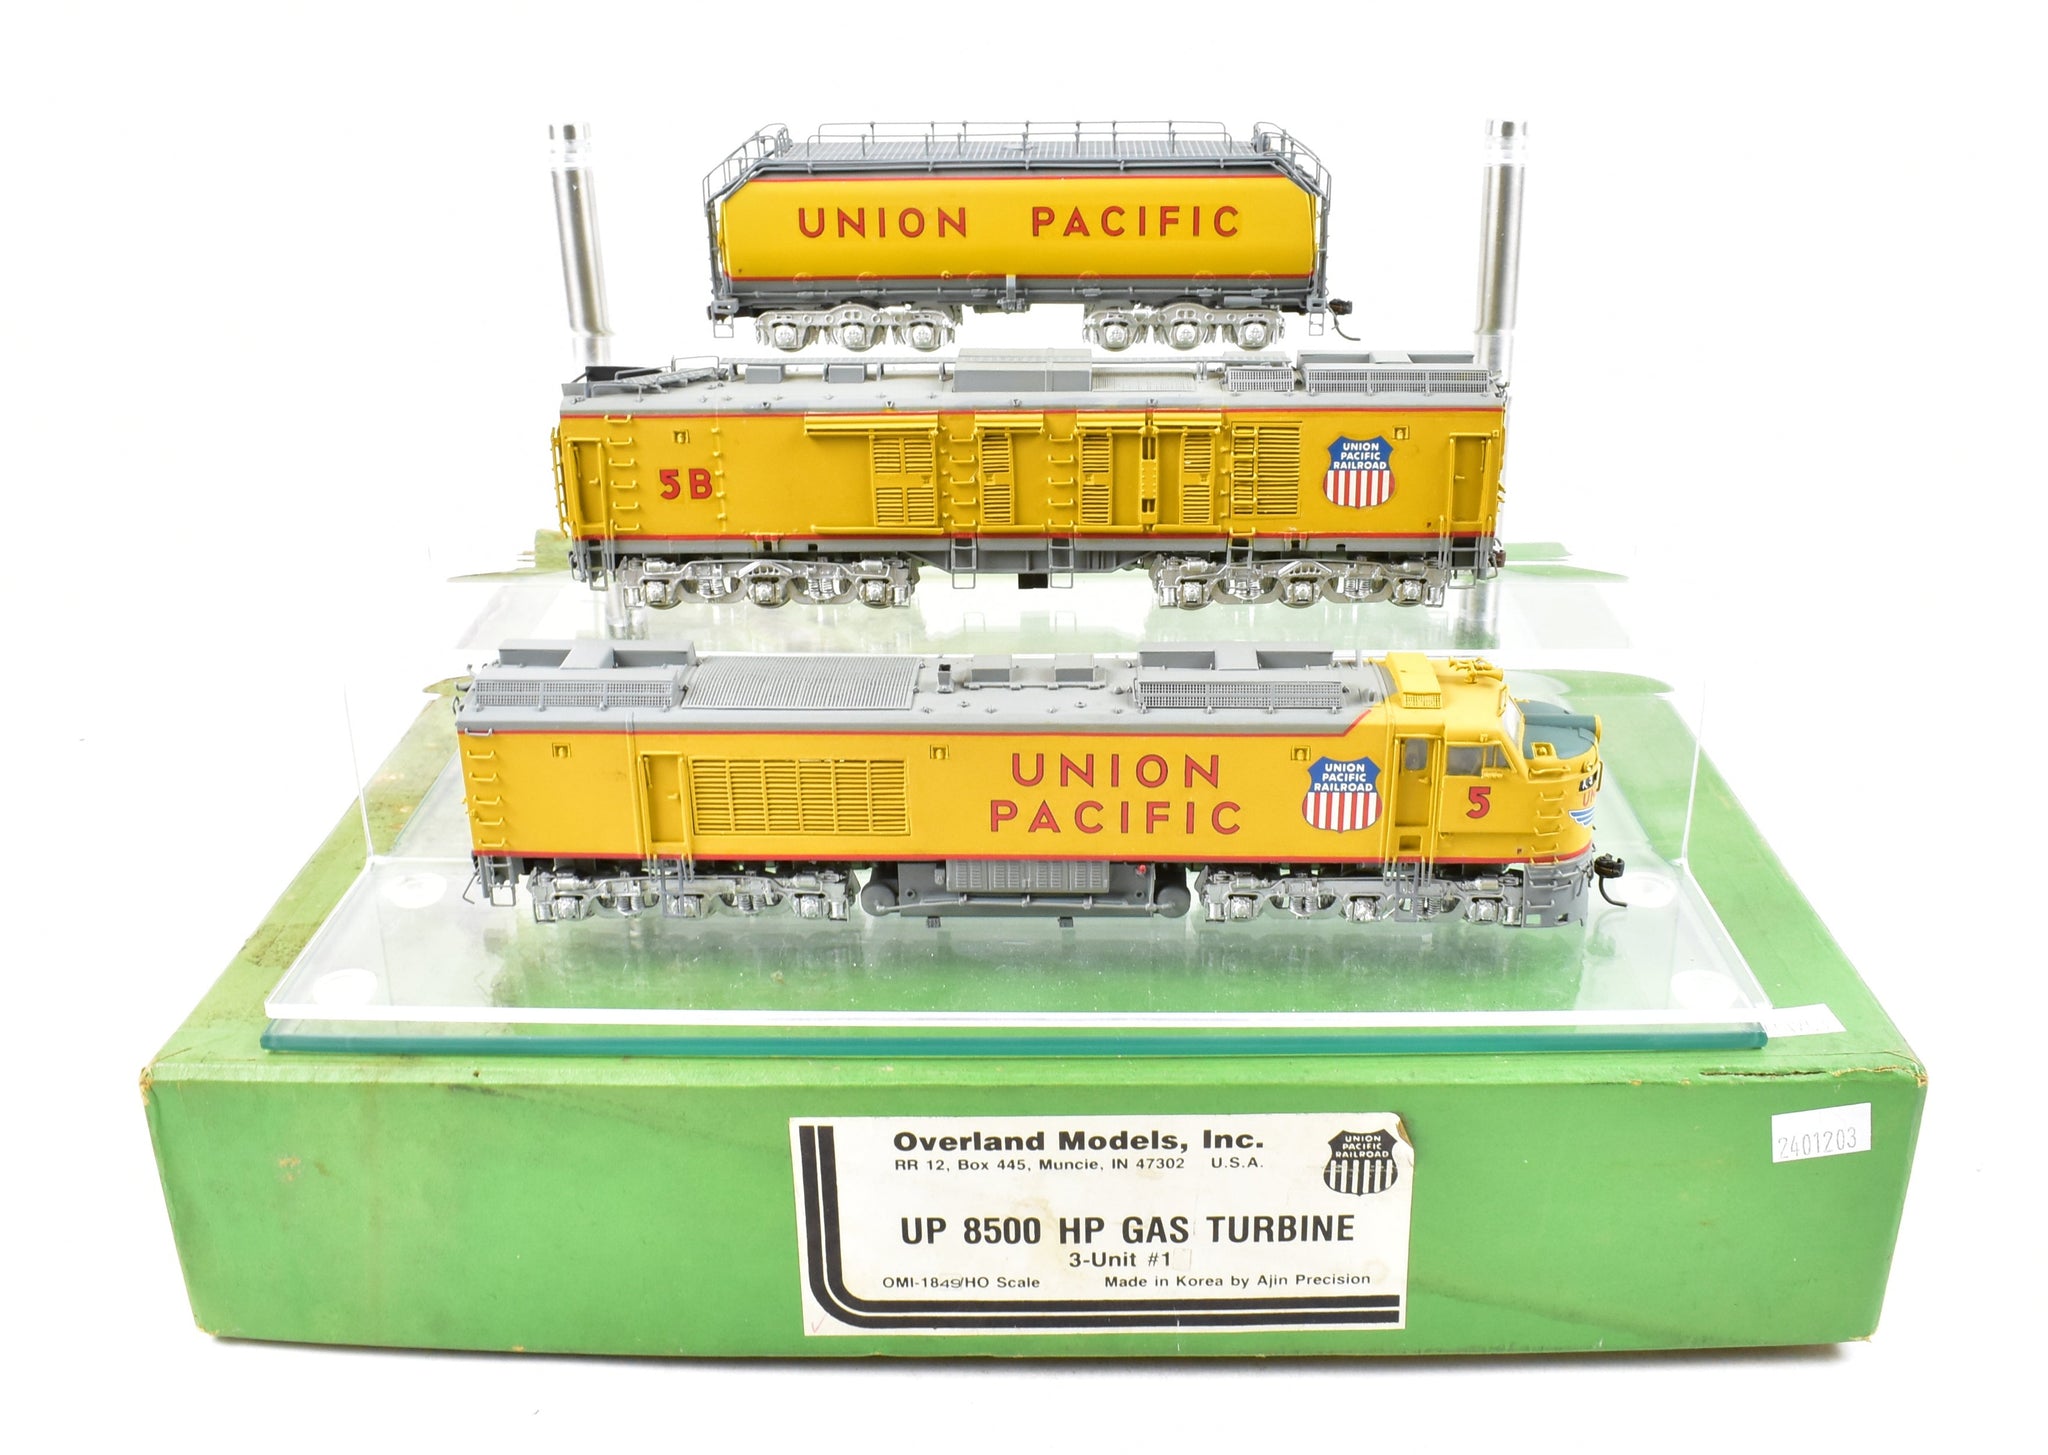 HO Brass OMI - Overland Models, Inc. UP - Union Pacific GE 8500 HP